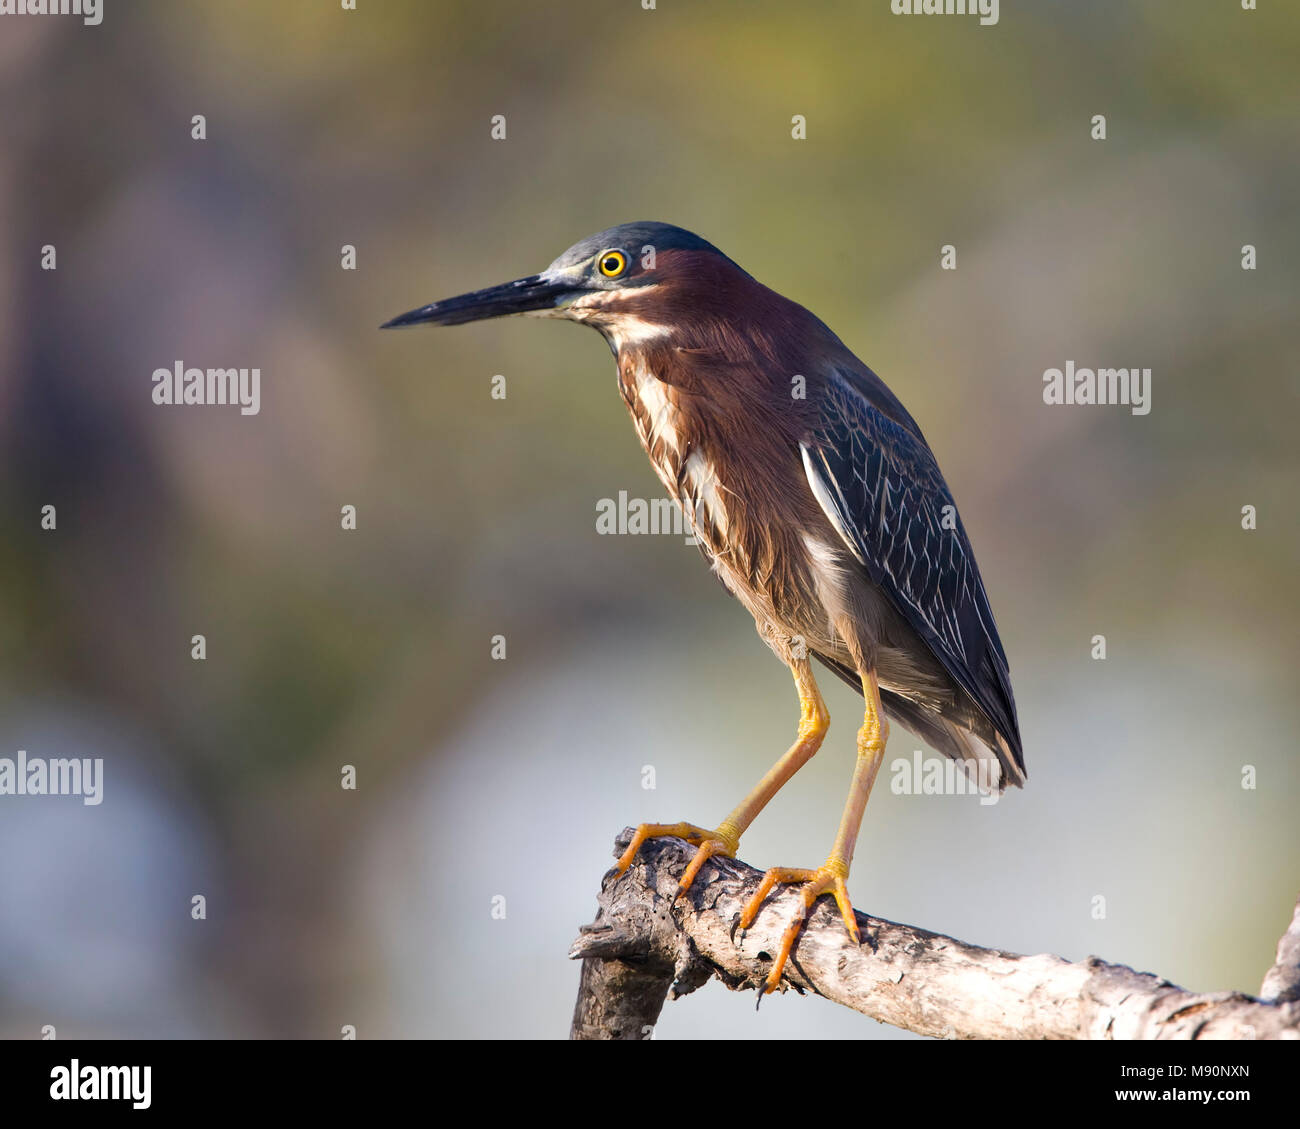 Groene Reiger adult jagend Mexico, Green Heron adult hunting Mexico Stock Photo